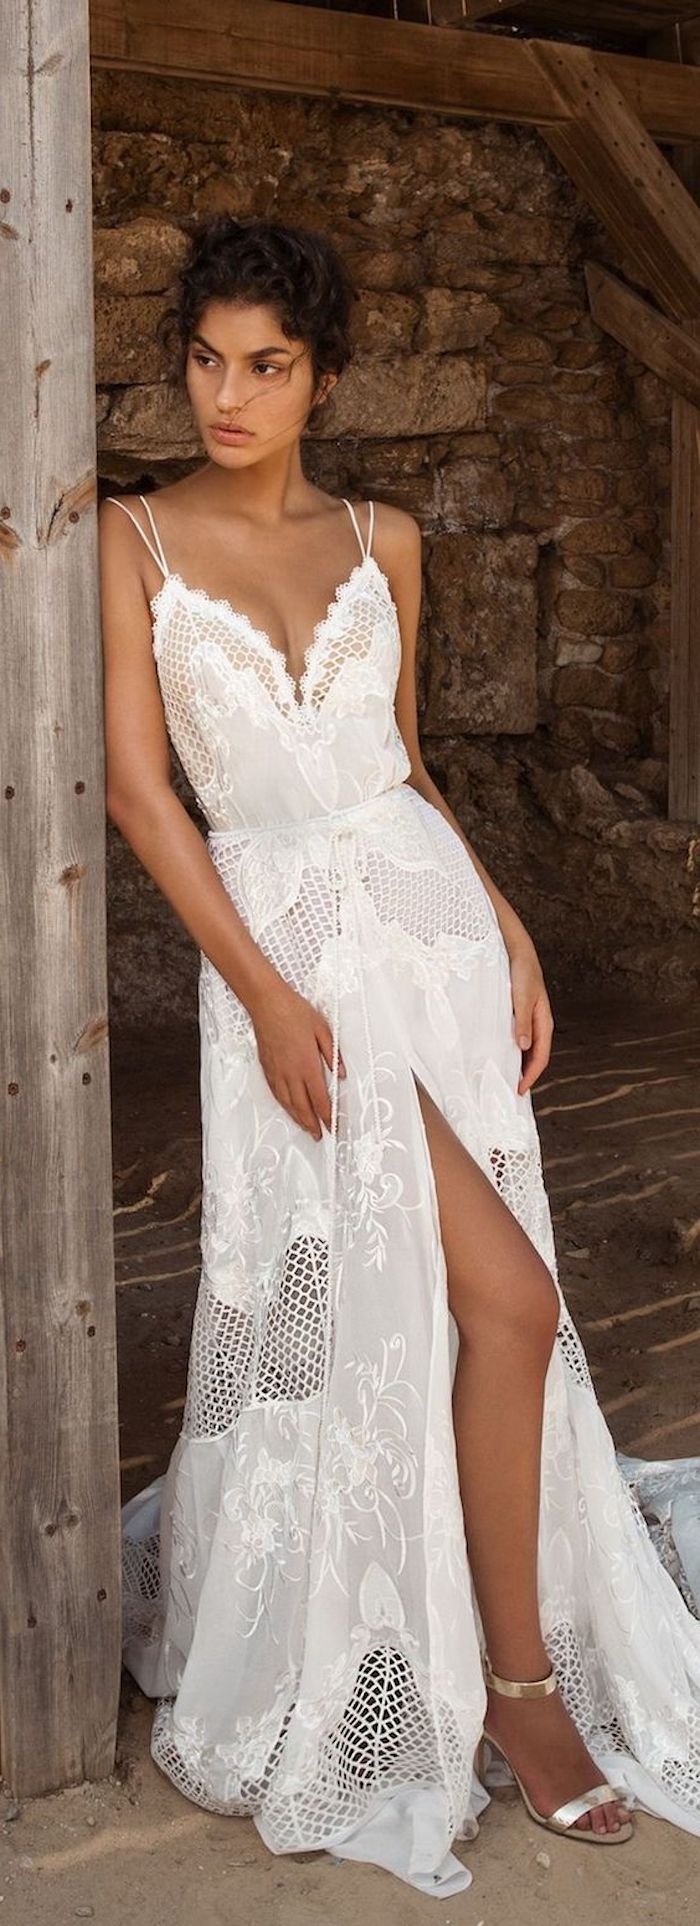 maxi dress in white, with lace inserts and embroidery, featuring thin straps and a slit, casual beach wedding dresses, worn by tanned brunette young woman, with curly dark hair put up, and silver heeled sandals